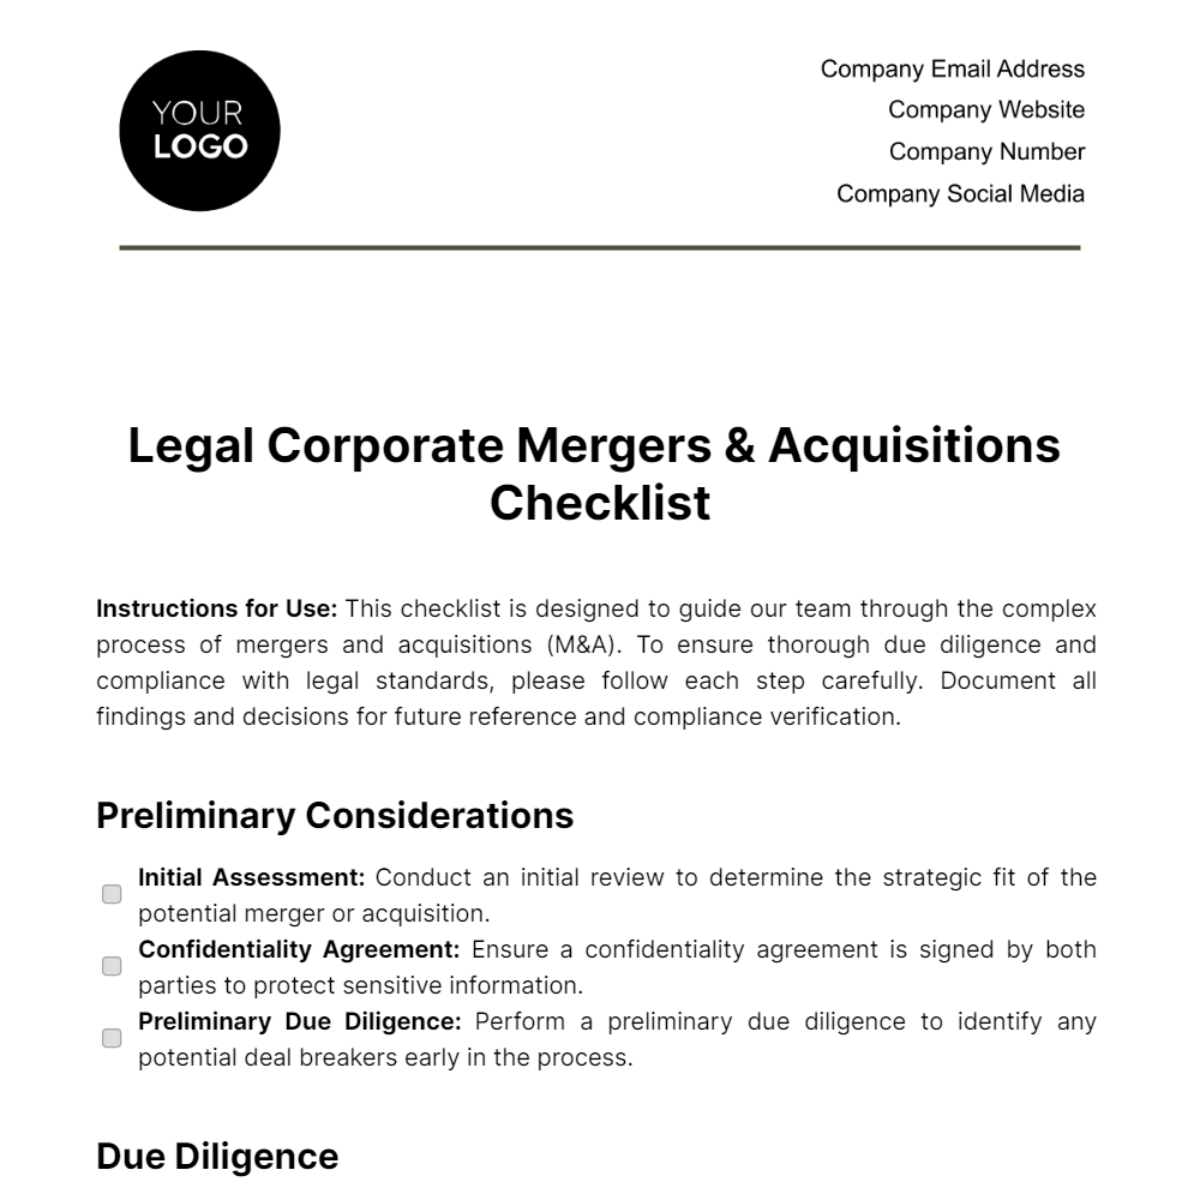 Legal Corporate Mergers & Acquisitions Checklist Template